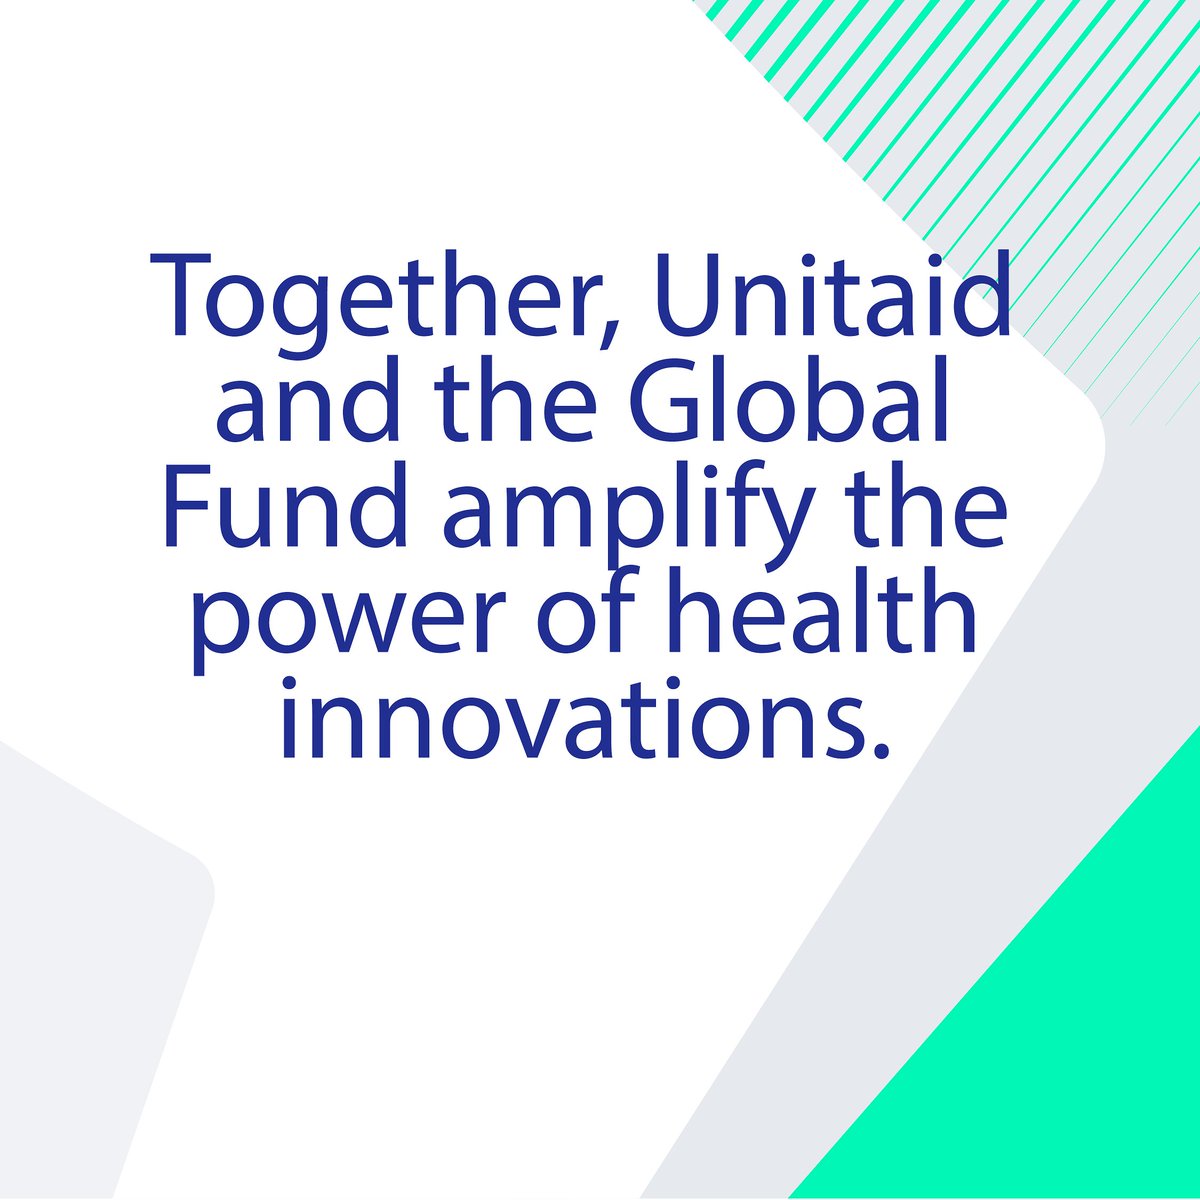 Investing in HIV, TB & malaria sees a 16% higher return in health & economic benefits when backed by innovations like those pioneered by Unitaid & scaled up by the @GlobalFund. Together, we're advancing global health goals and saving lives faster. 👇 unitaid.org/news-blog/part…